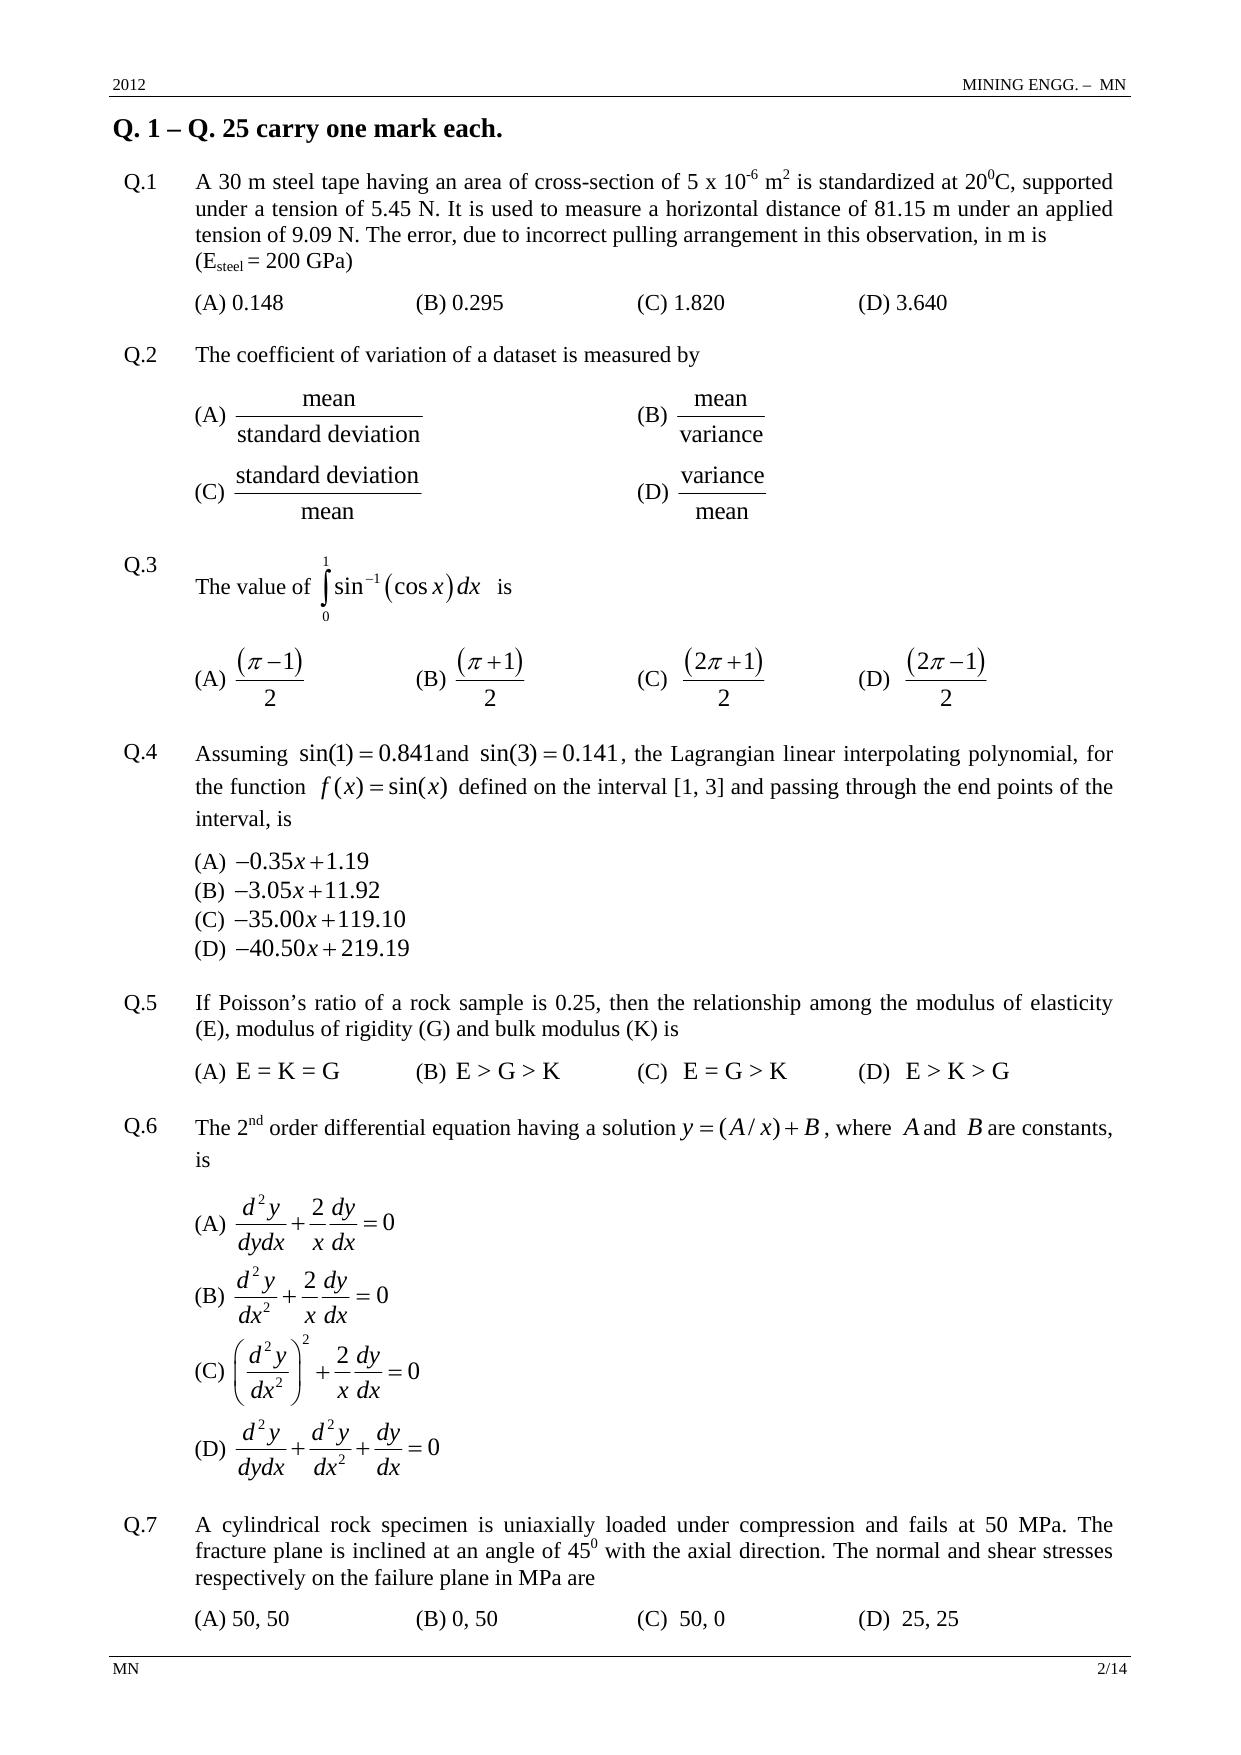 GATE 2012 Mining Engineering (MN) Question Paper with Answer Key - Page 2